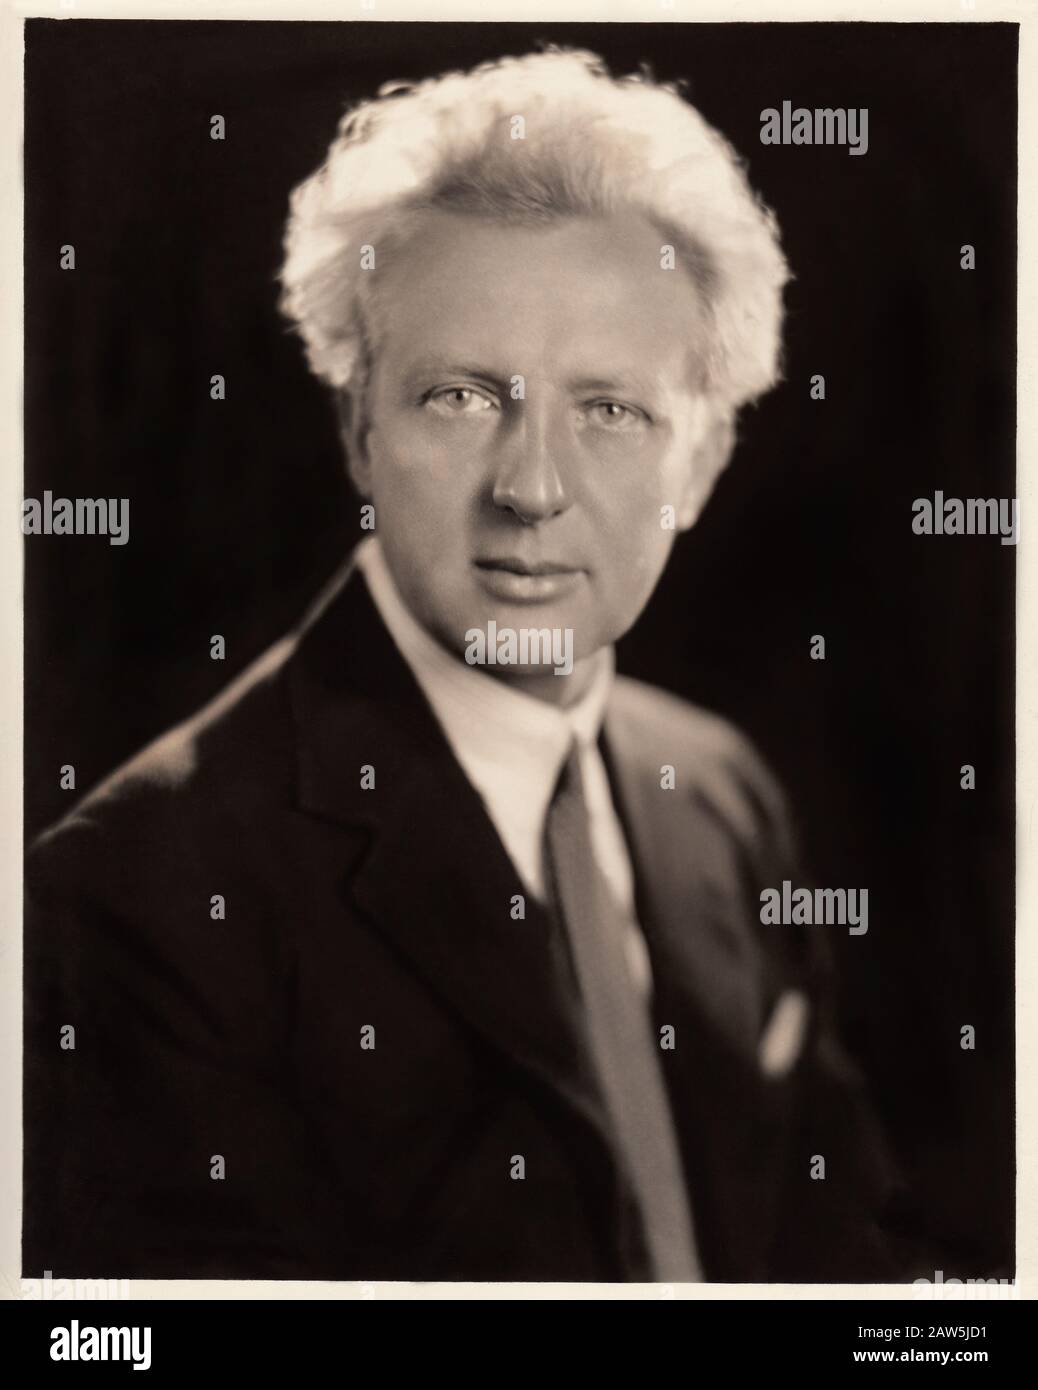 1932 ca, Philadelphia  , USA  : The celebrated british music conductor LEOPOLD STOKOWSKI ( 1882 - 1977 ) . Stokowski conducted the music for and appea Stock Photo